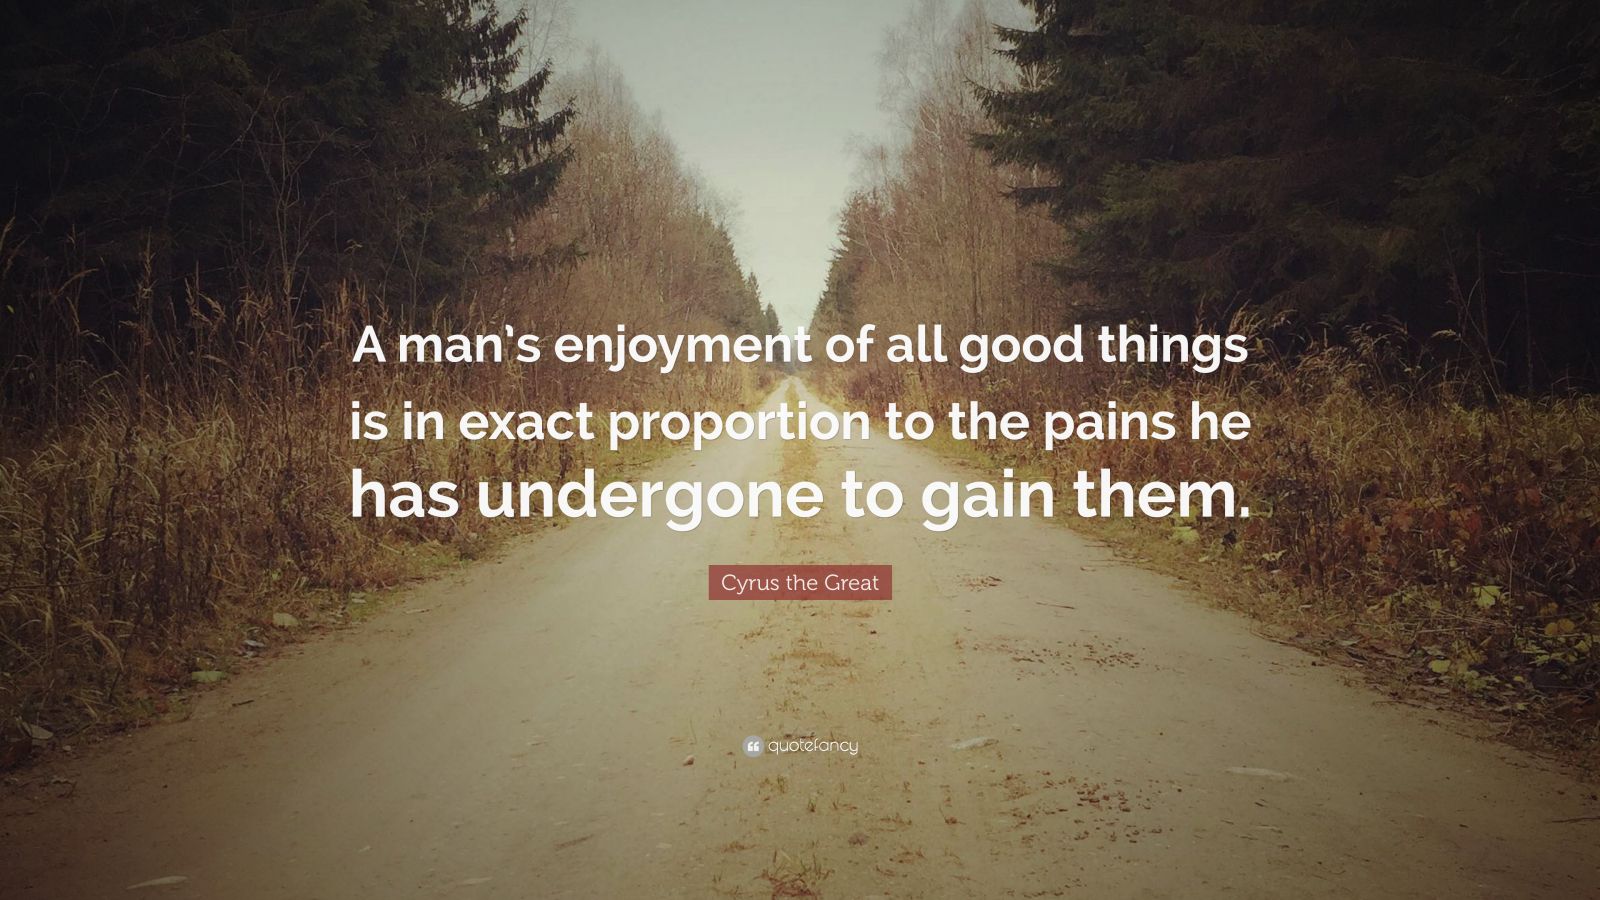 Cyrus the Great Quote: “A man’s enjoyment of all good things is in ...